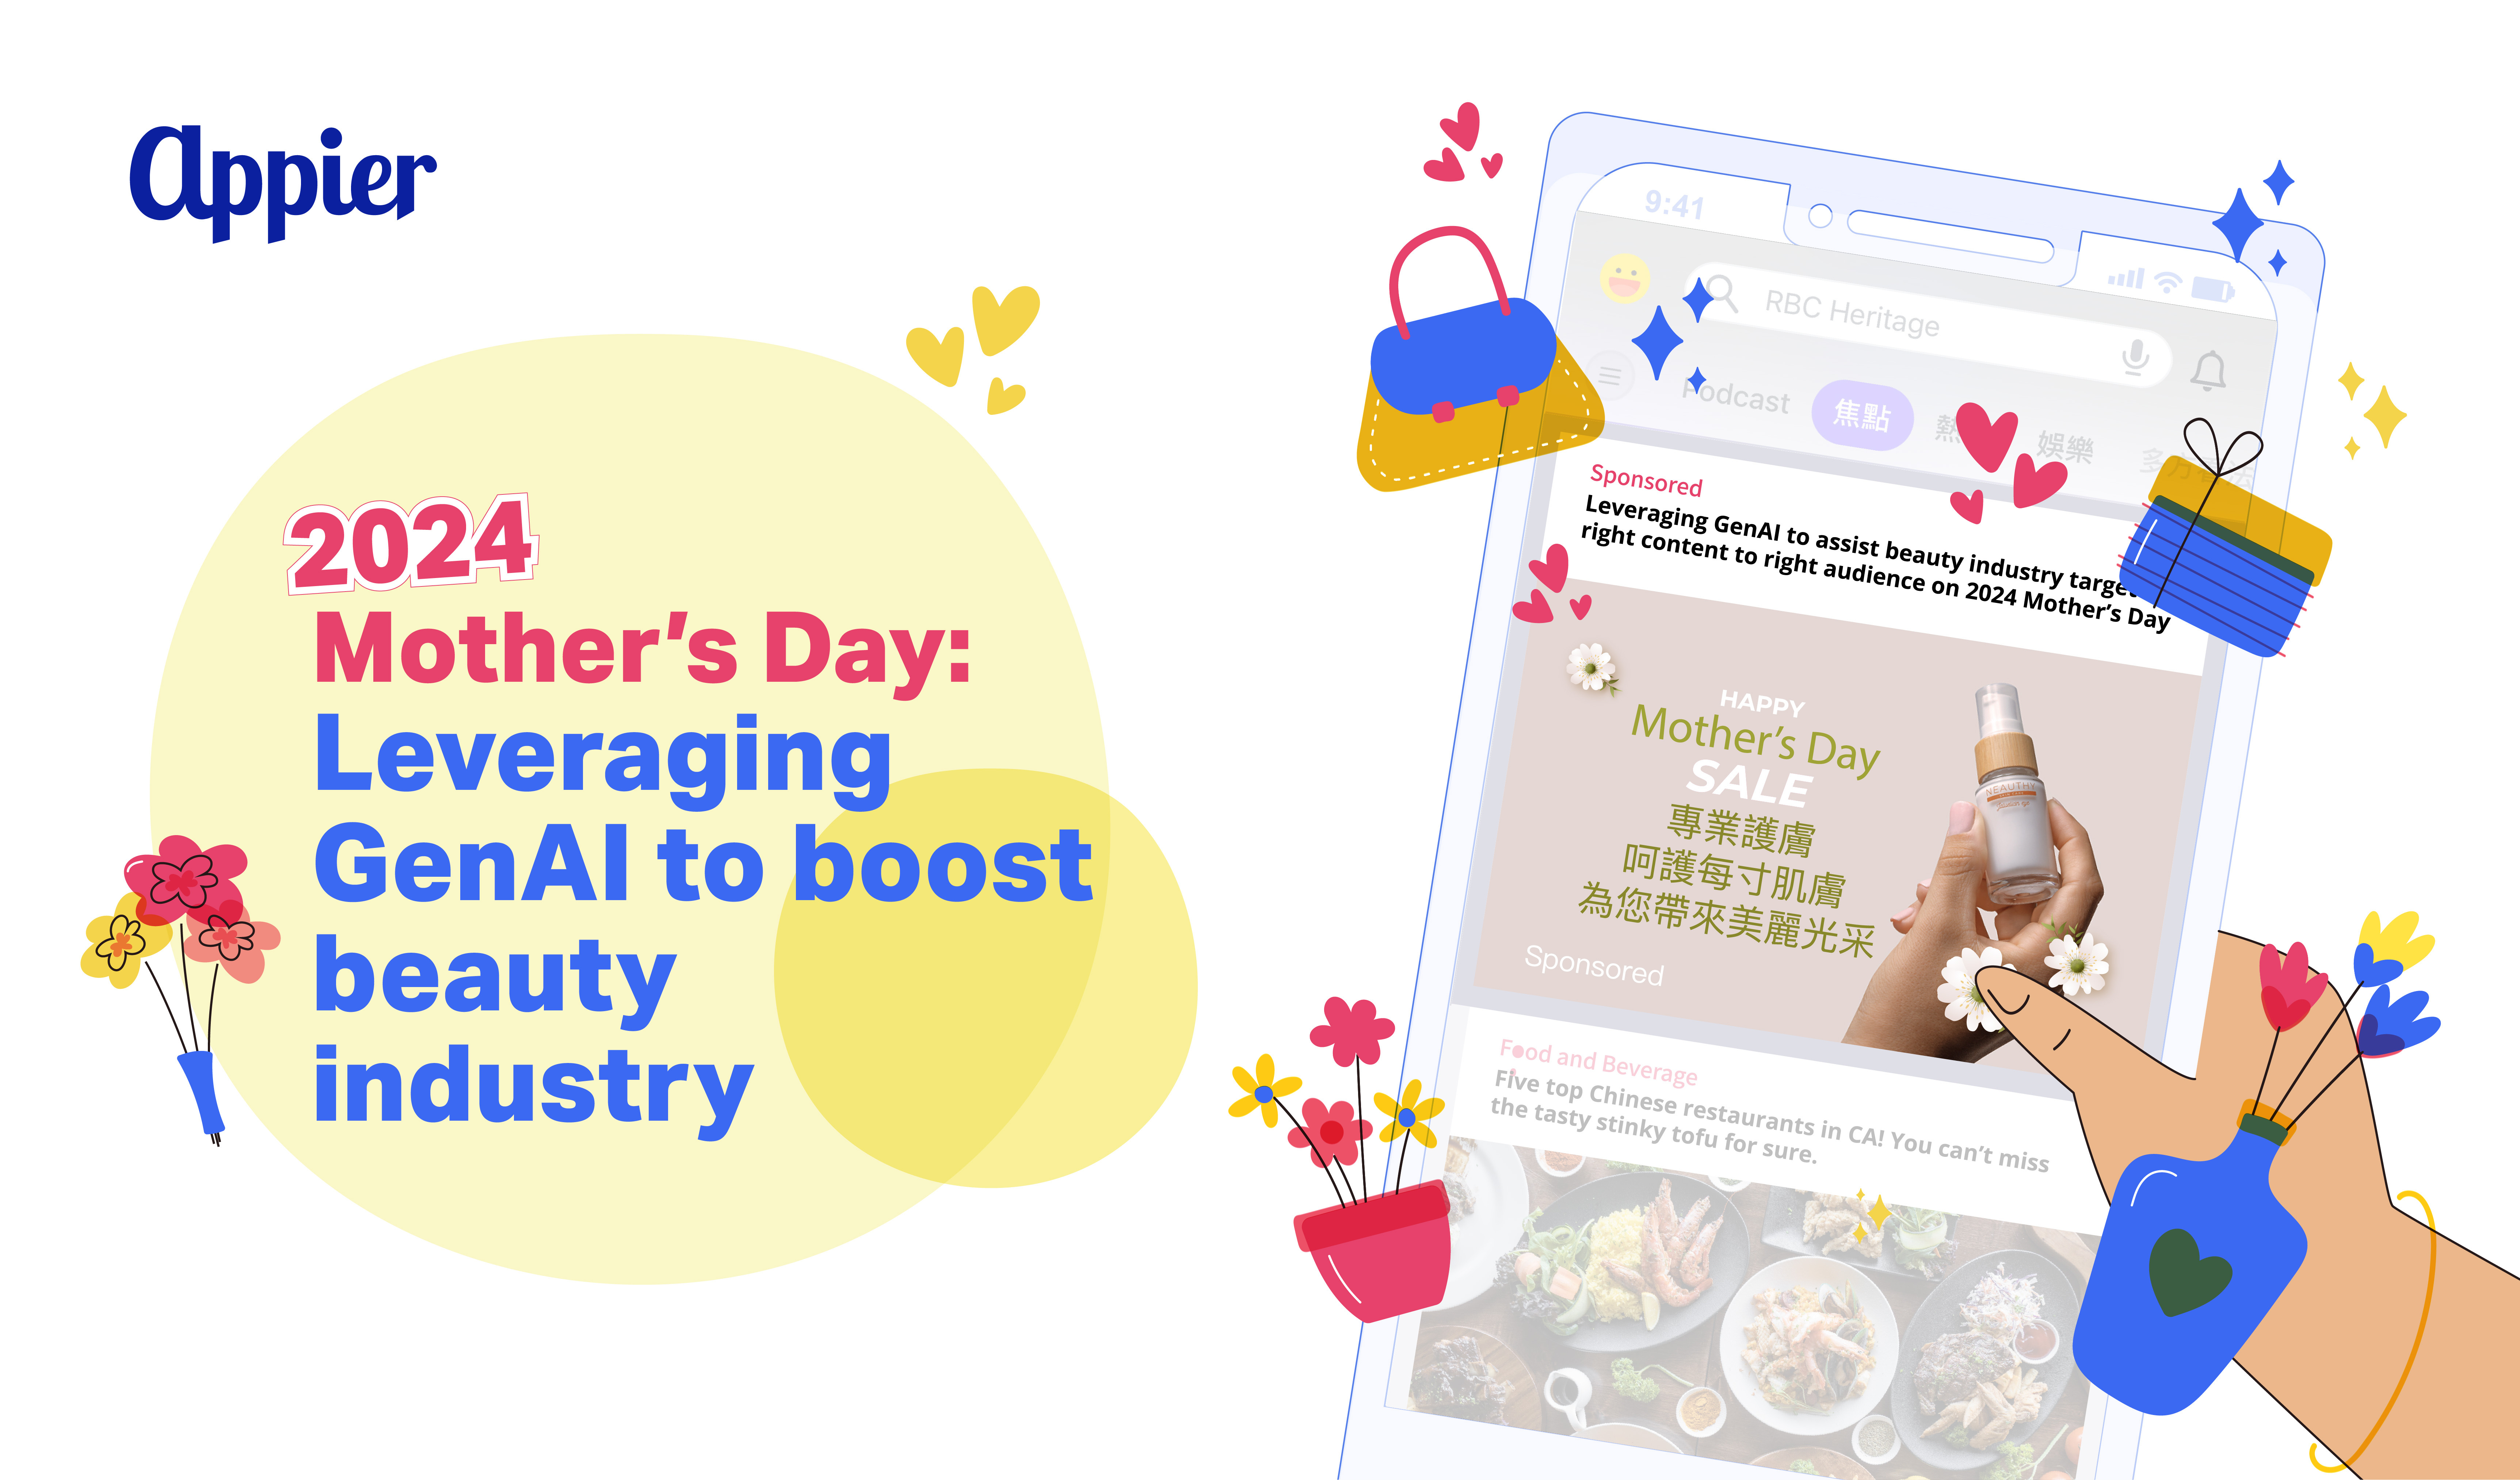 Empowering the Beauty Industry Utilizing GenAI to Target the Ideal Content for Mother's Day 2024